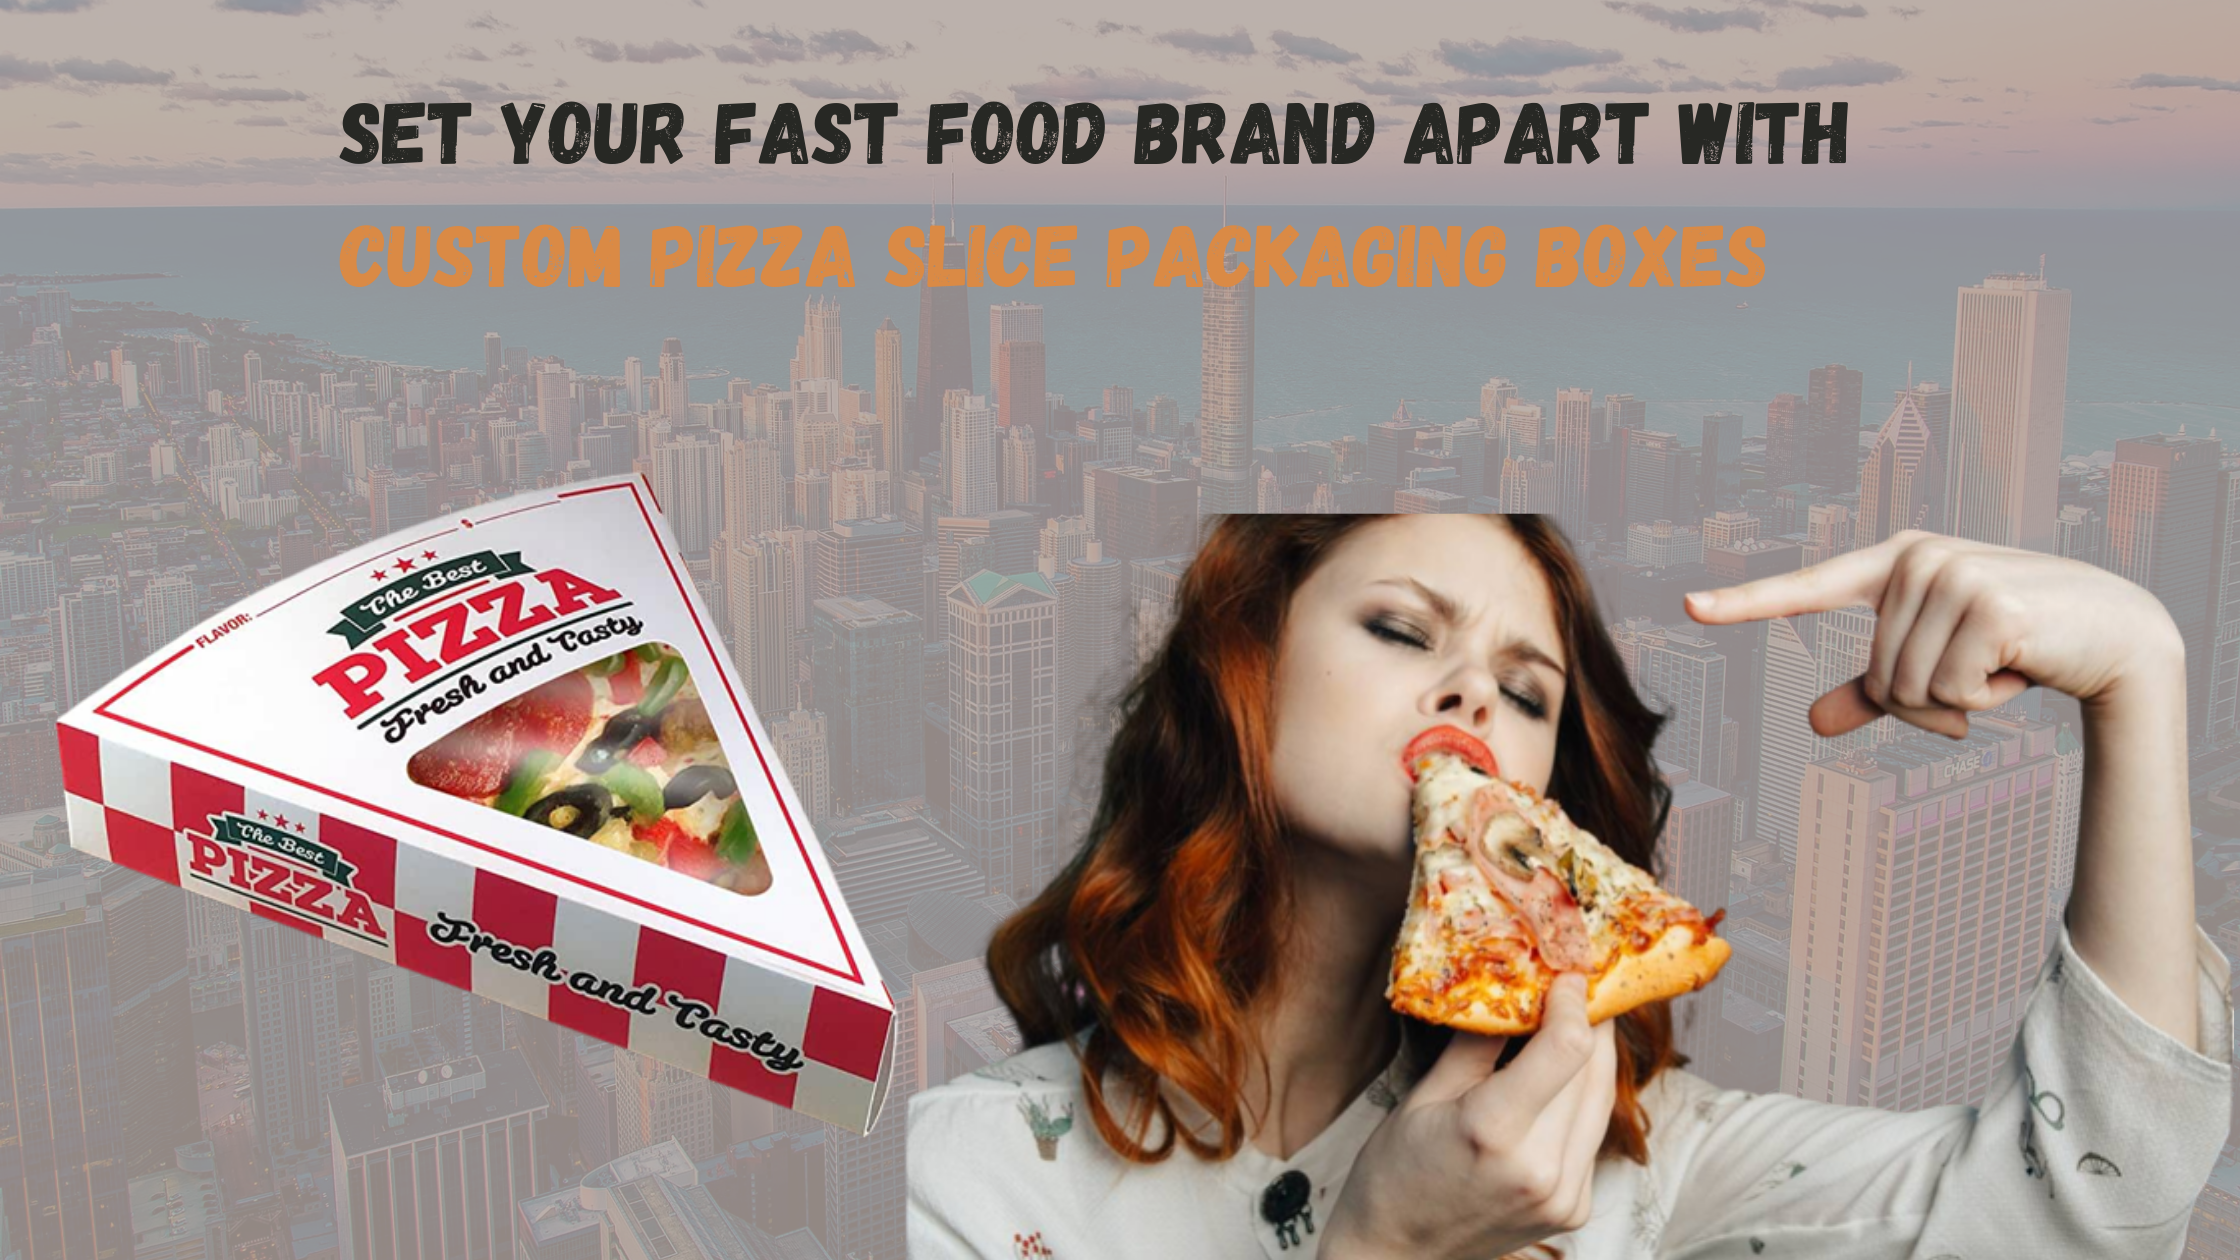 Set Fast Food With Custom Pizza Slice Packaging Boxes